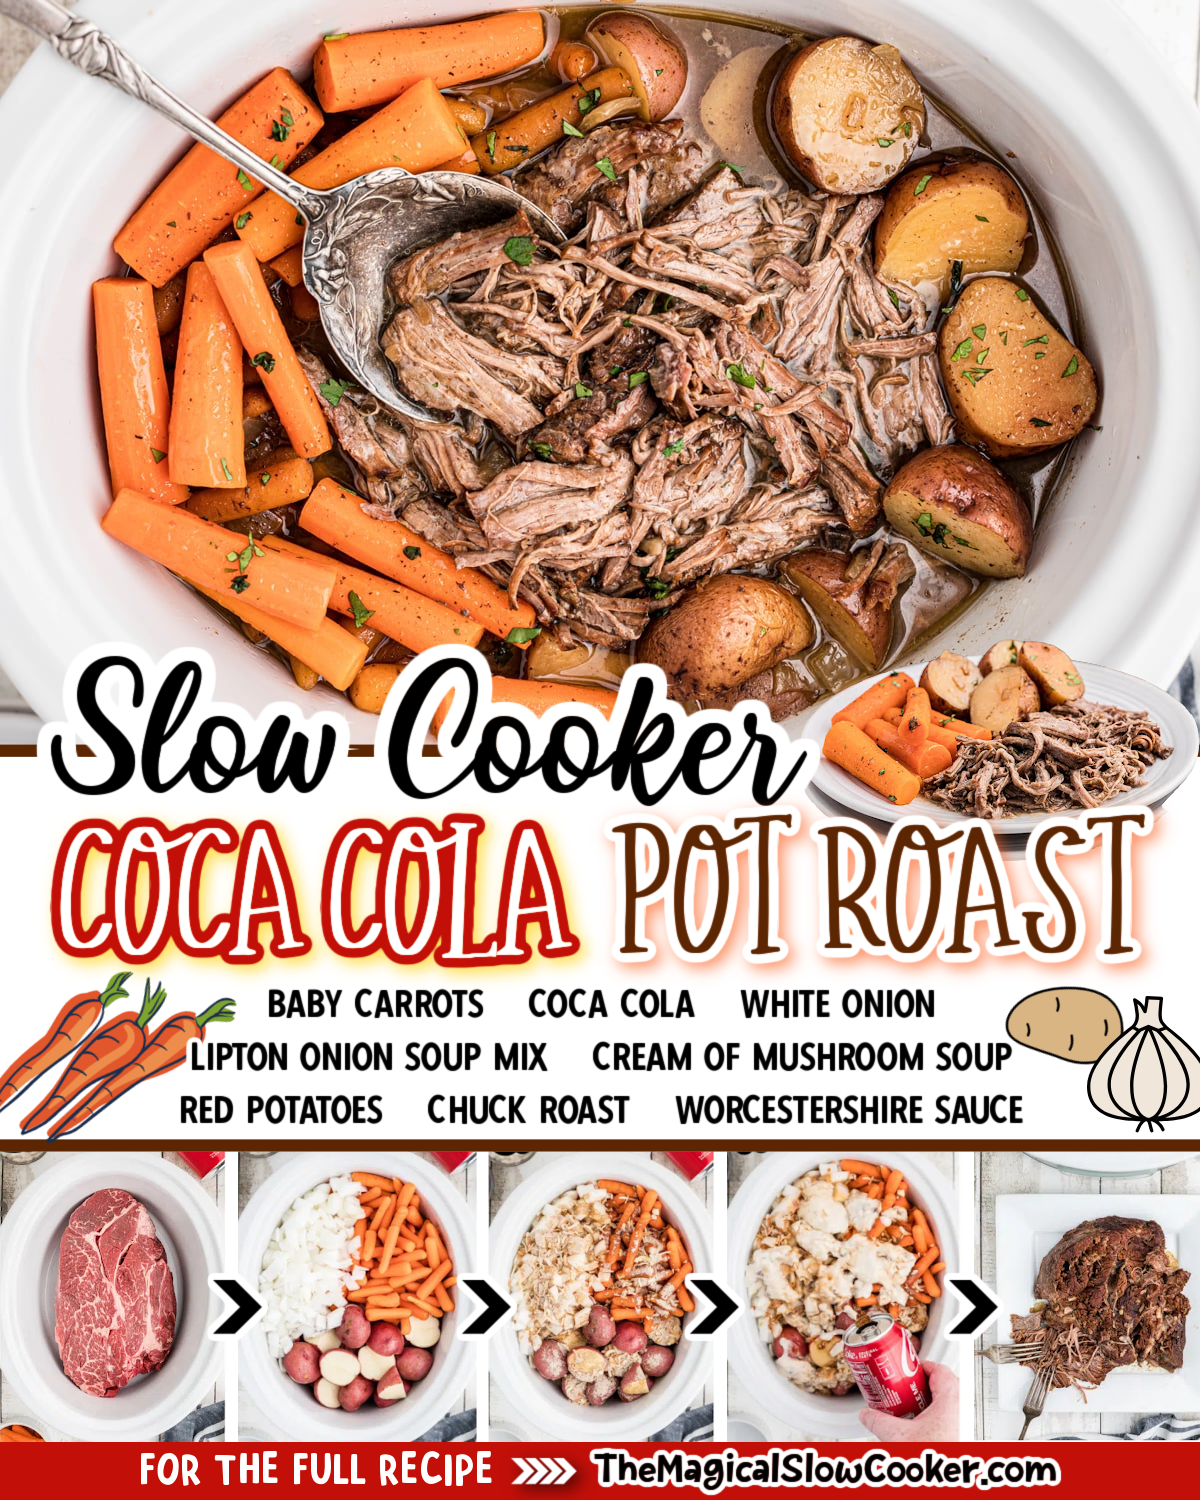 Coca cola pot roast images text of the ingredients for facebook and pinterest.